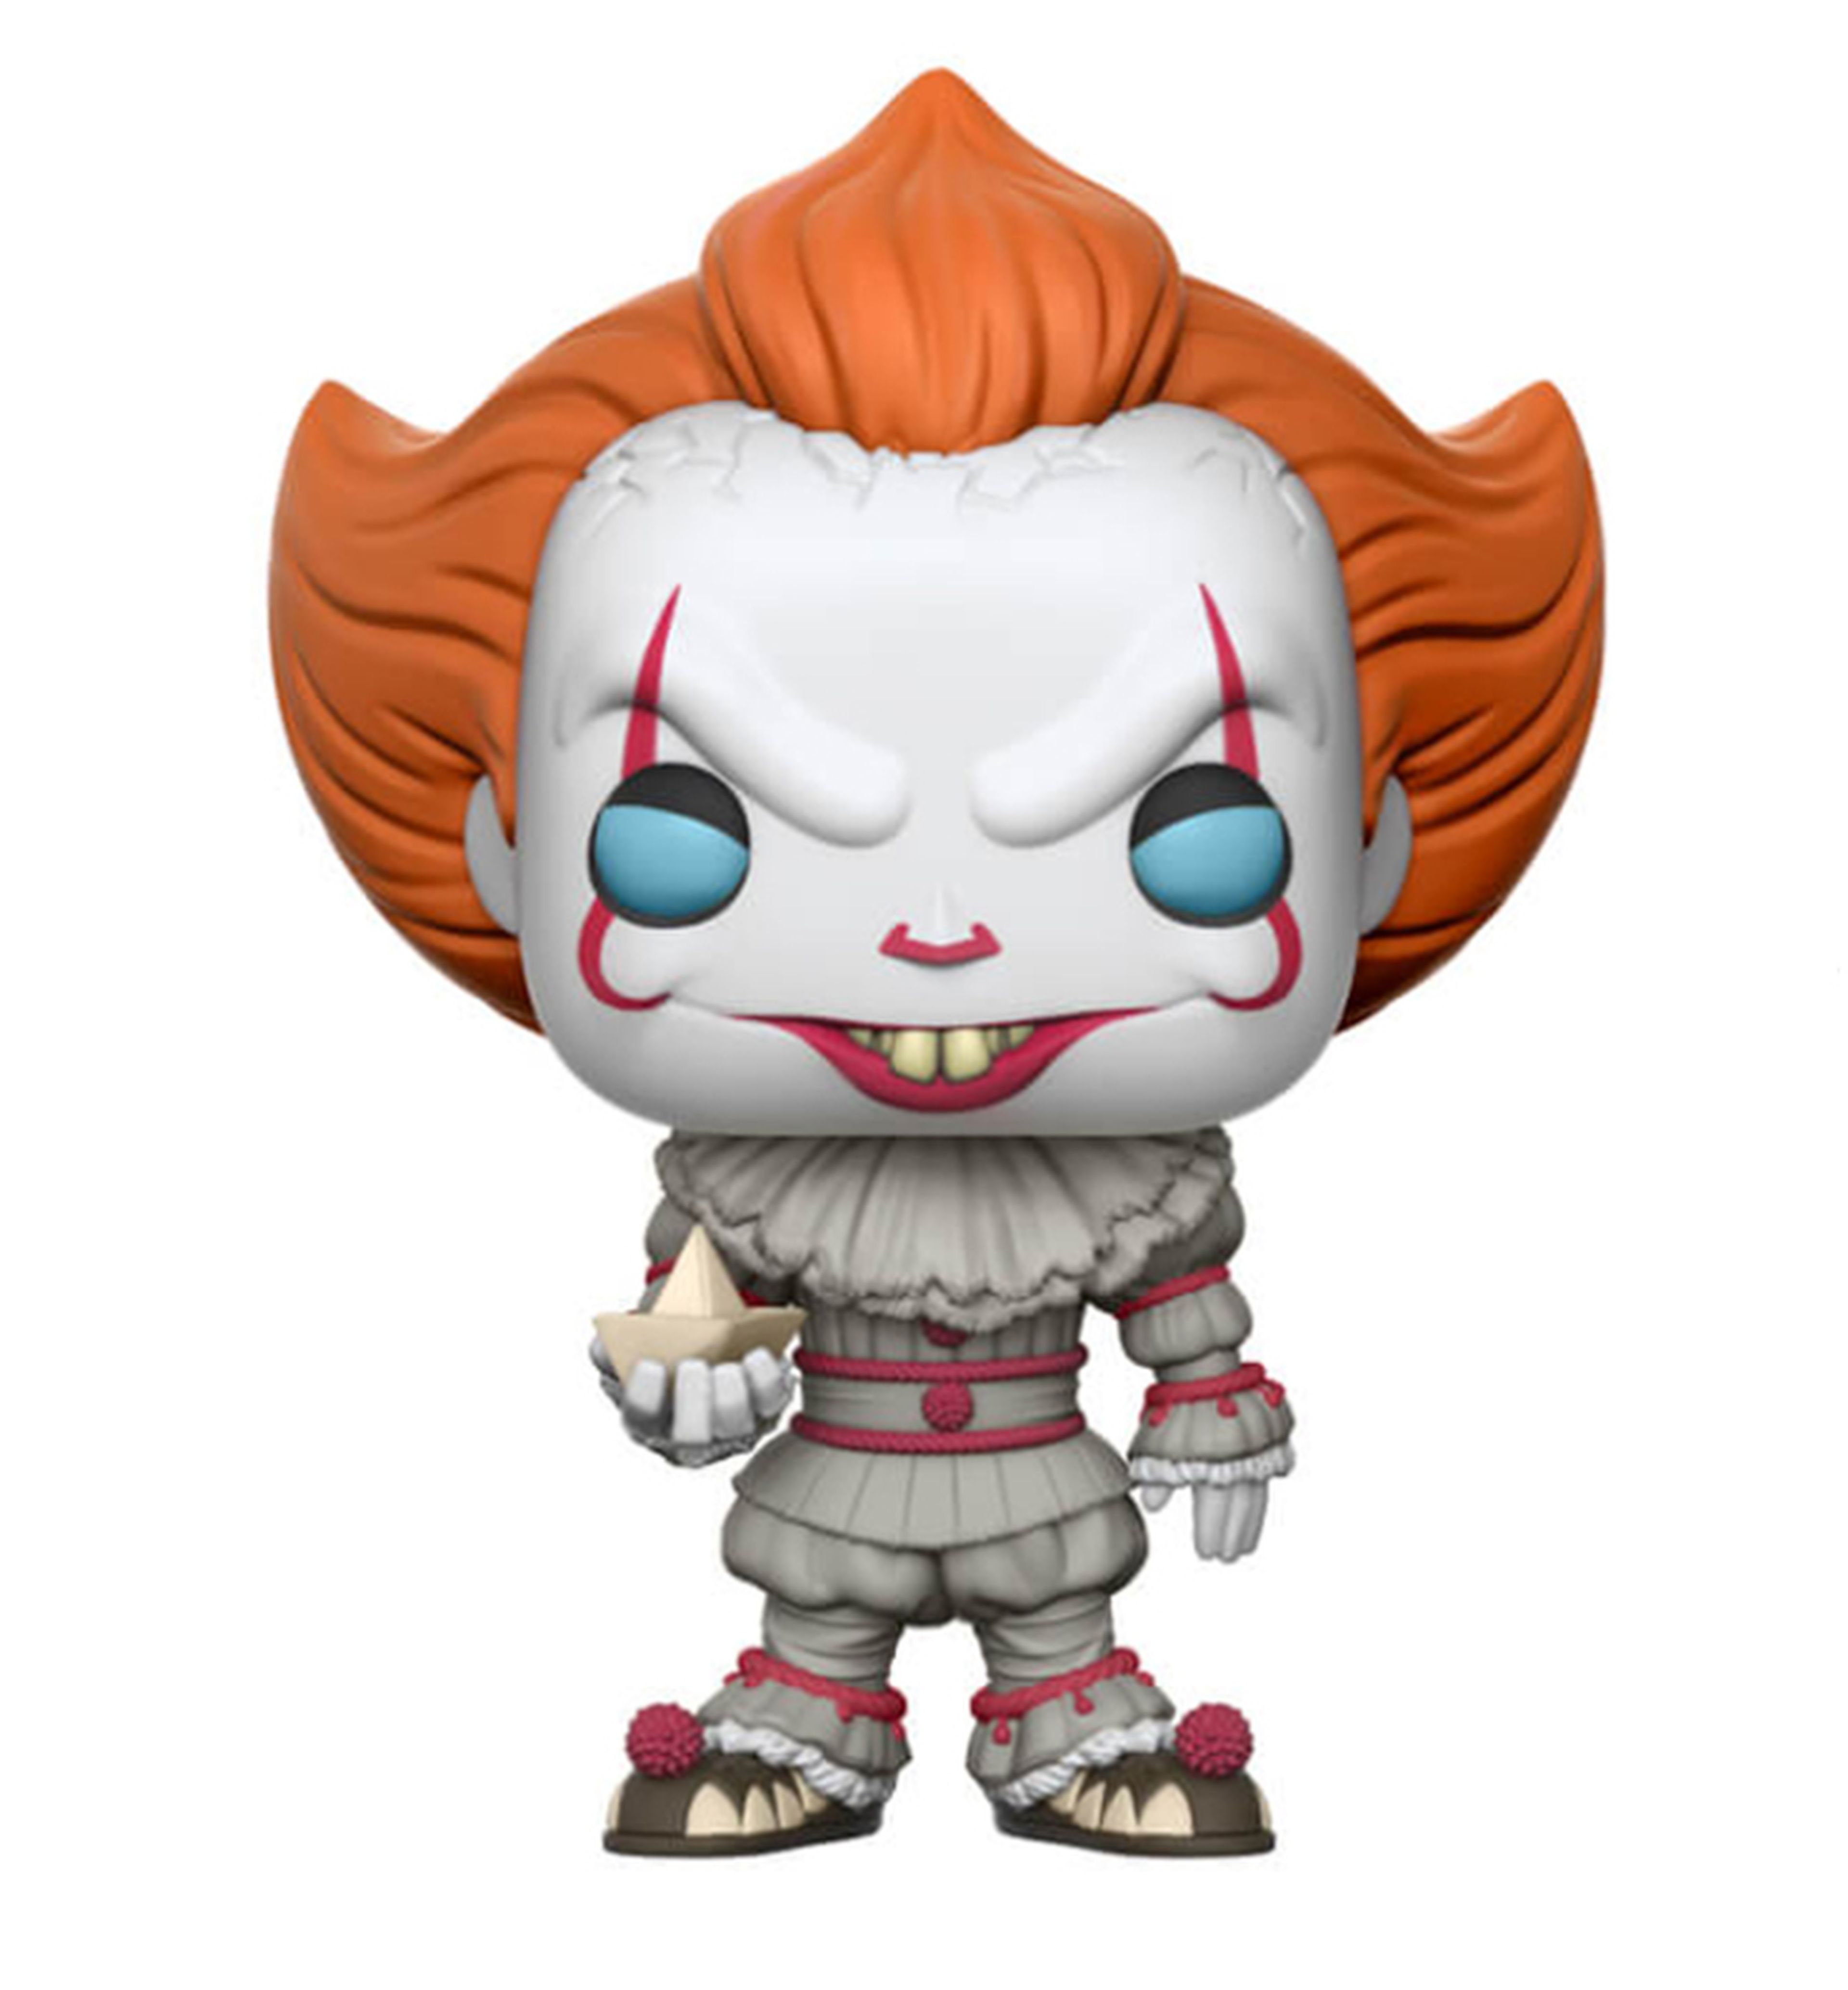 Pennywise - It Capitulo 2 Funko